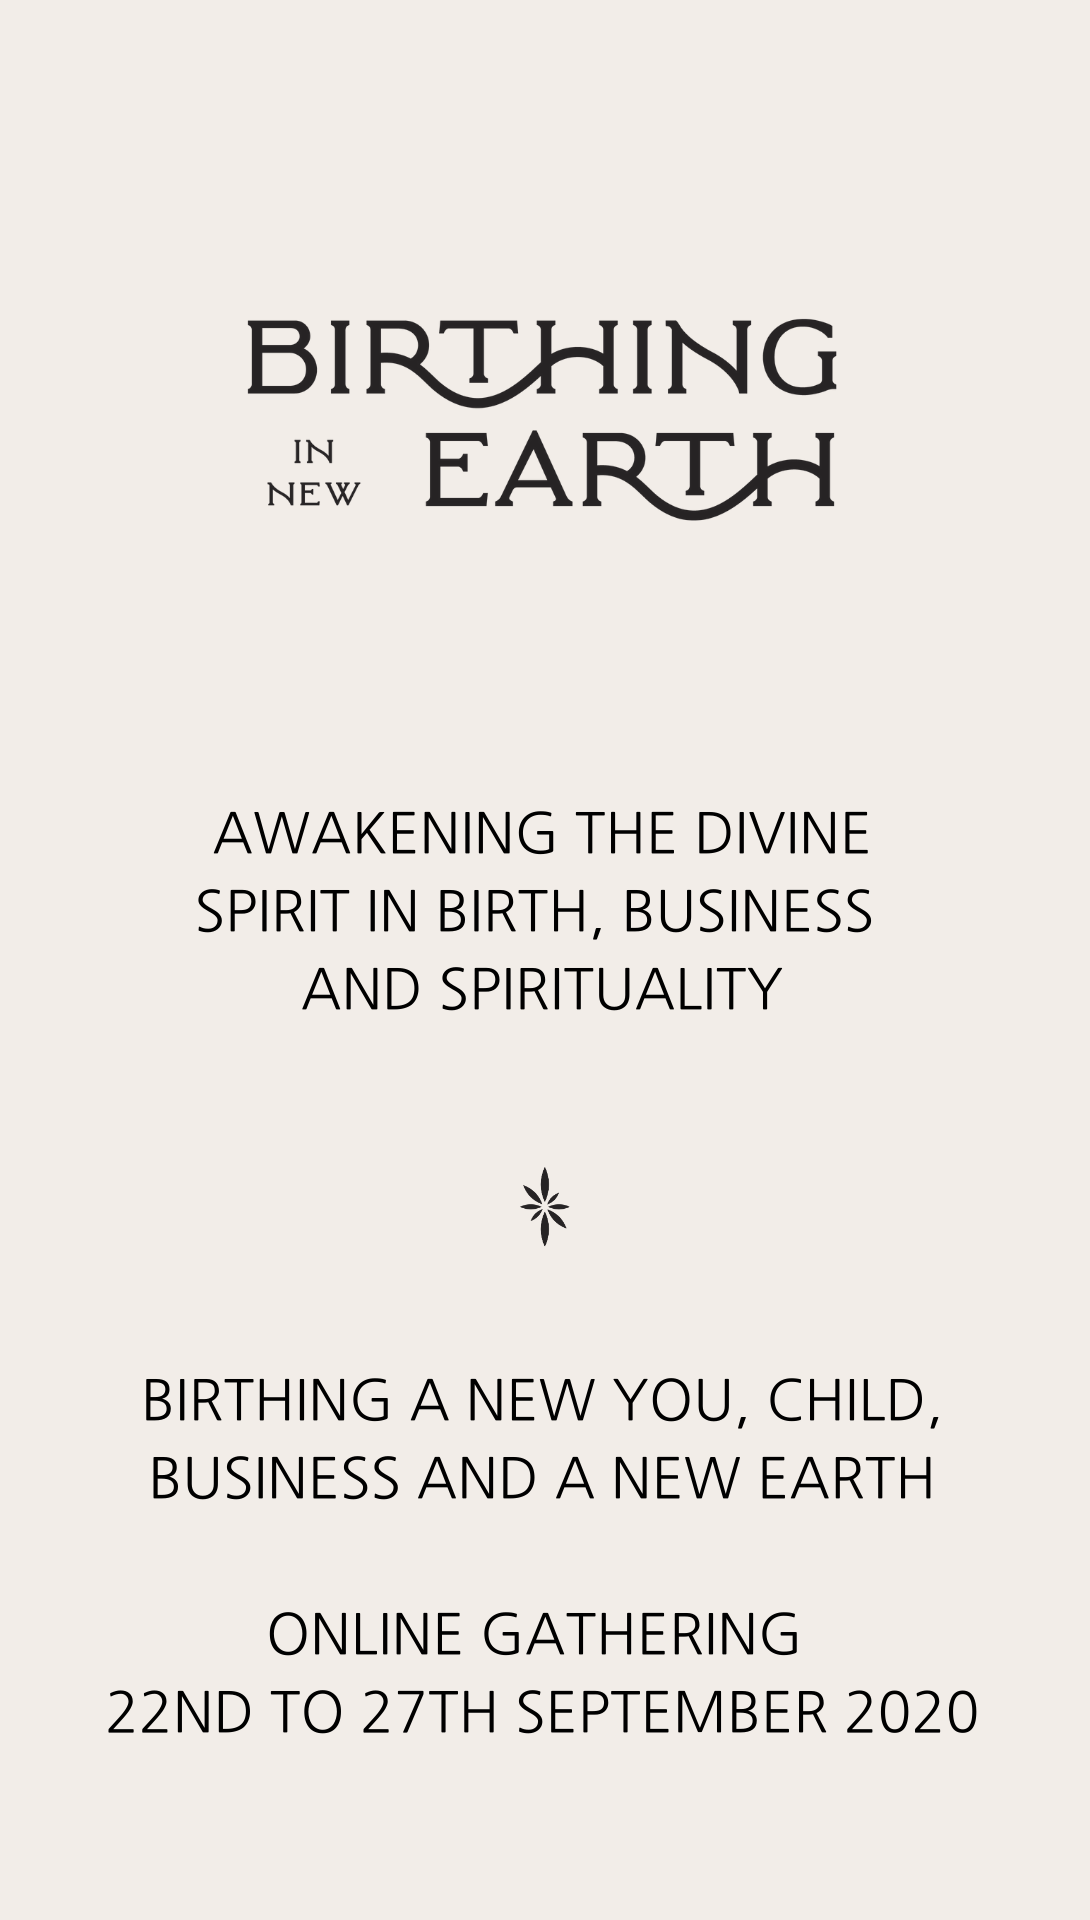 Birthing in New Earth - Awakening the Divine Feminine in Birth, Business and Spirituality. Sept 22-27th